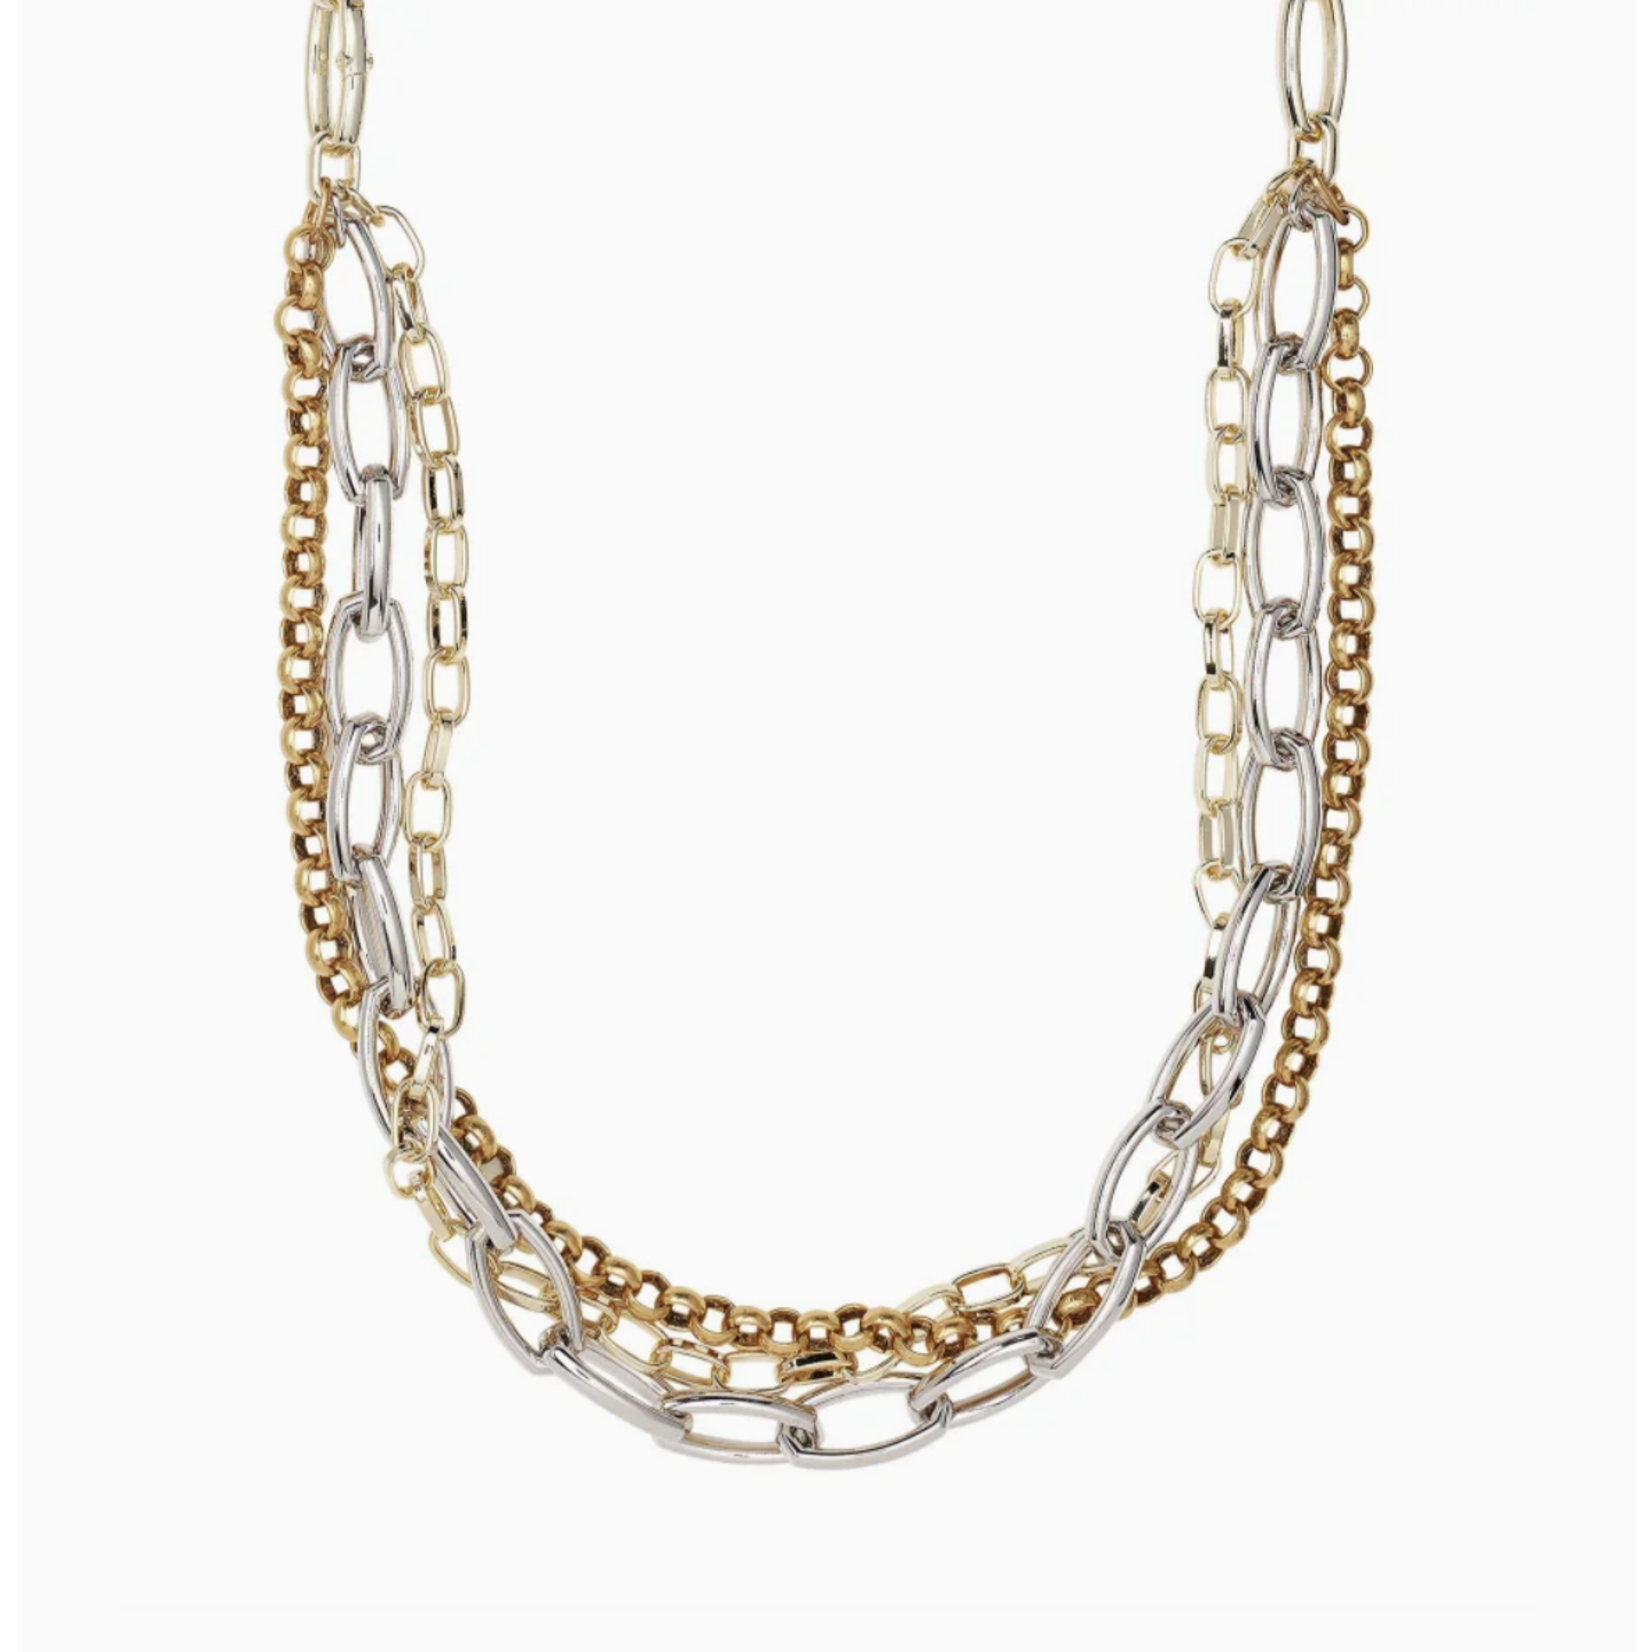 Kendra Scott Ryder Chain Necklace Mixed Metal